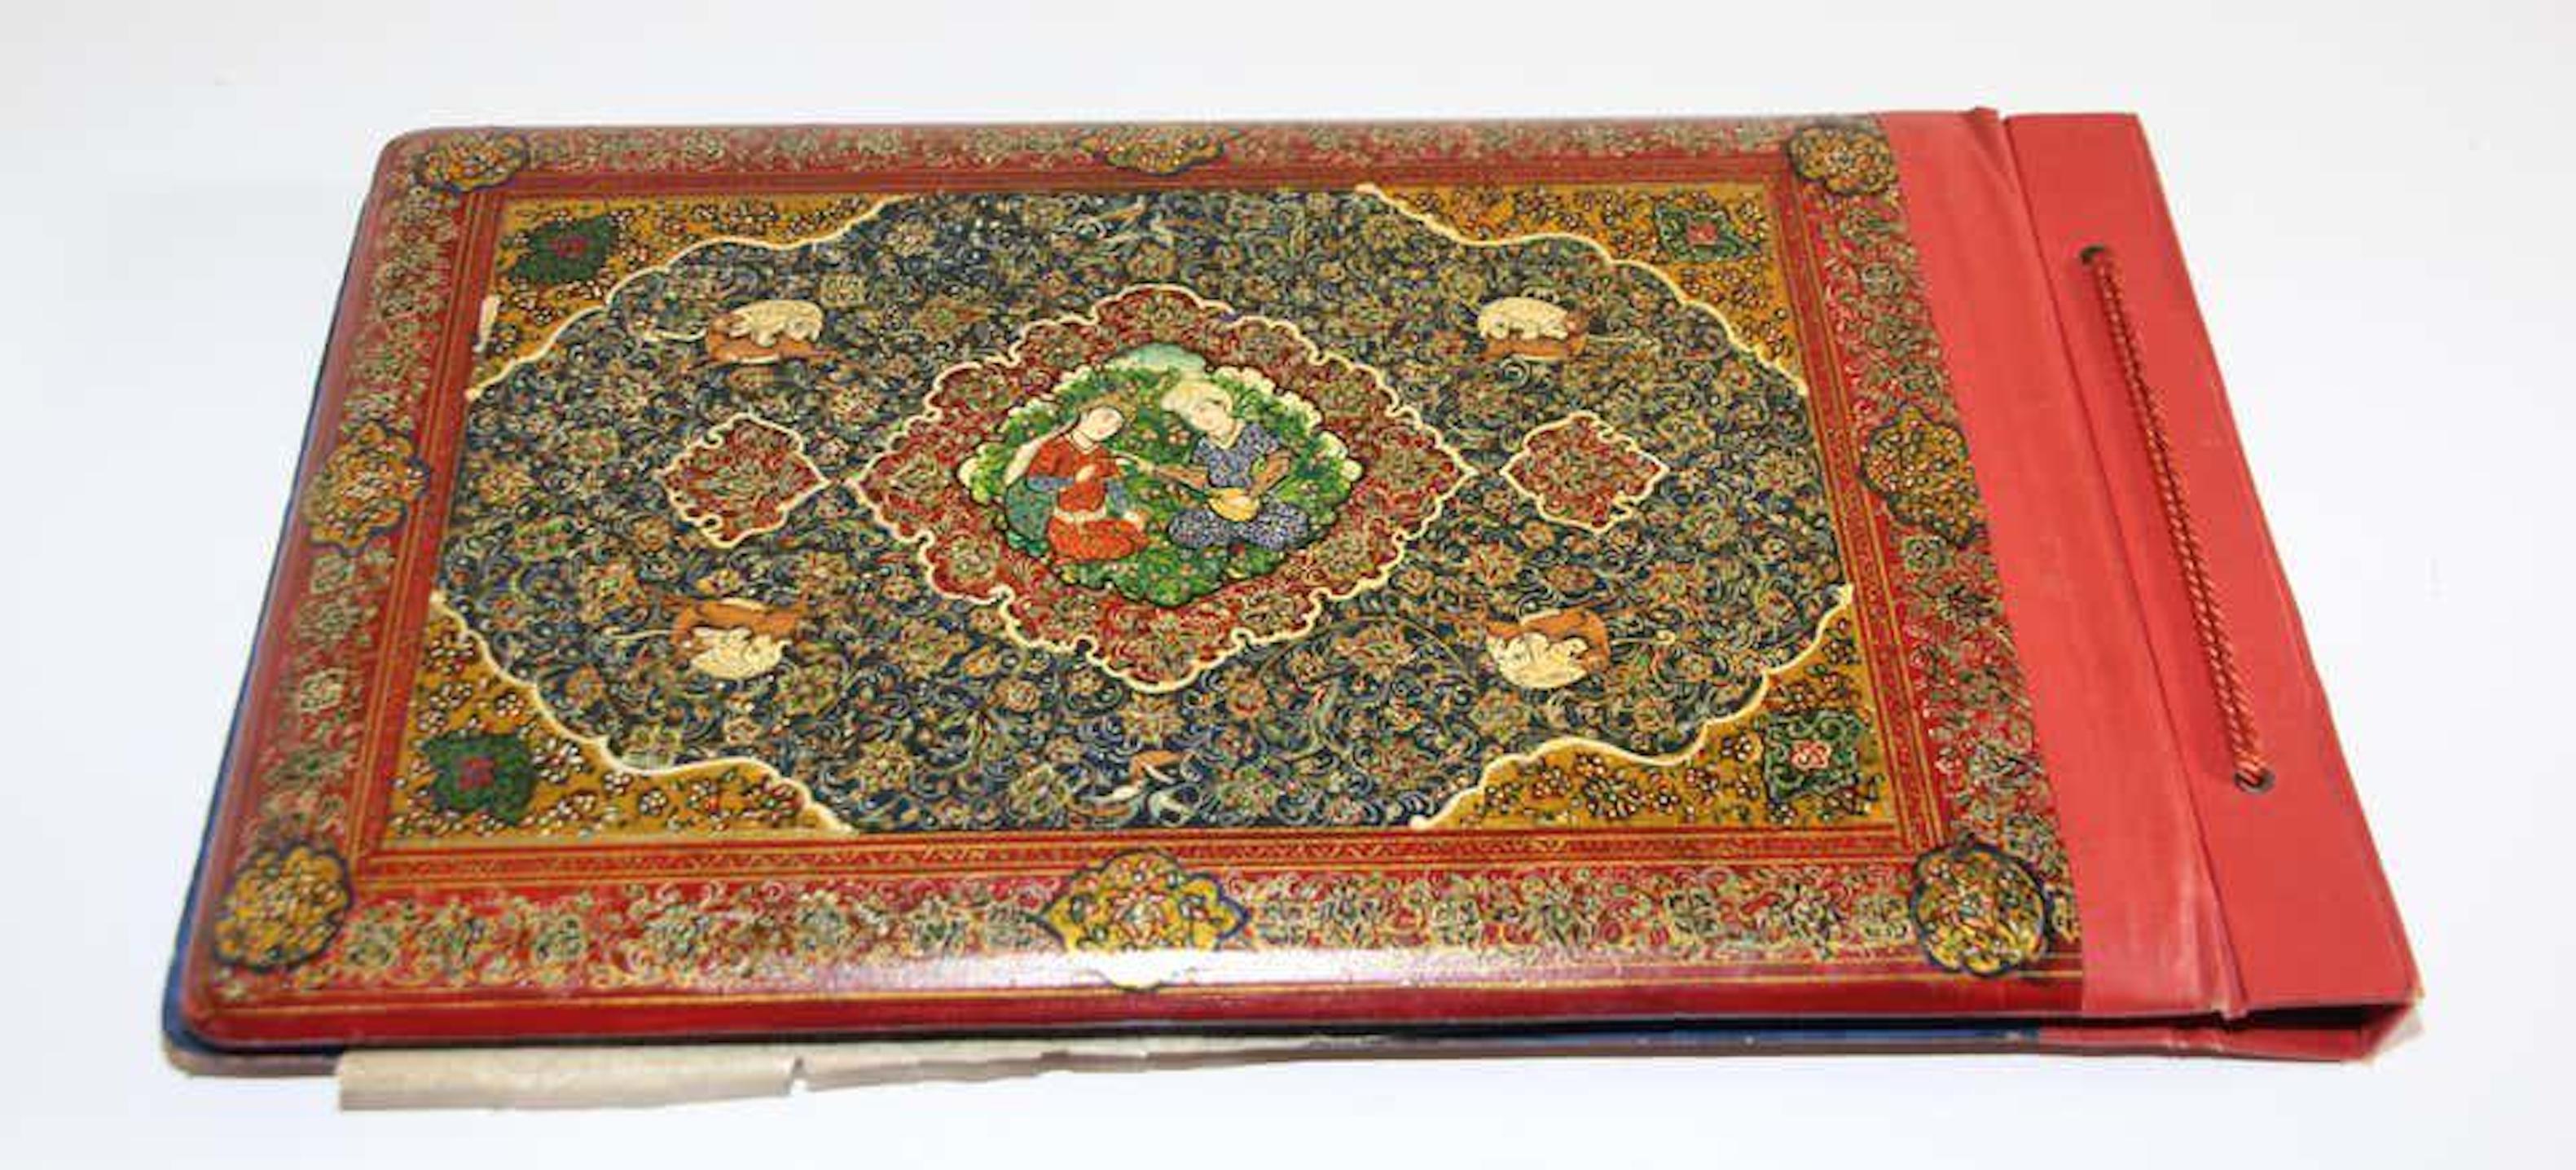 Hand Painted Middle Eastern Moorish Style Photo Album, 19th Century In Fair Condition For Sale In North Hollywood, CA